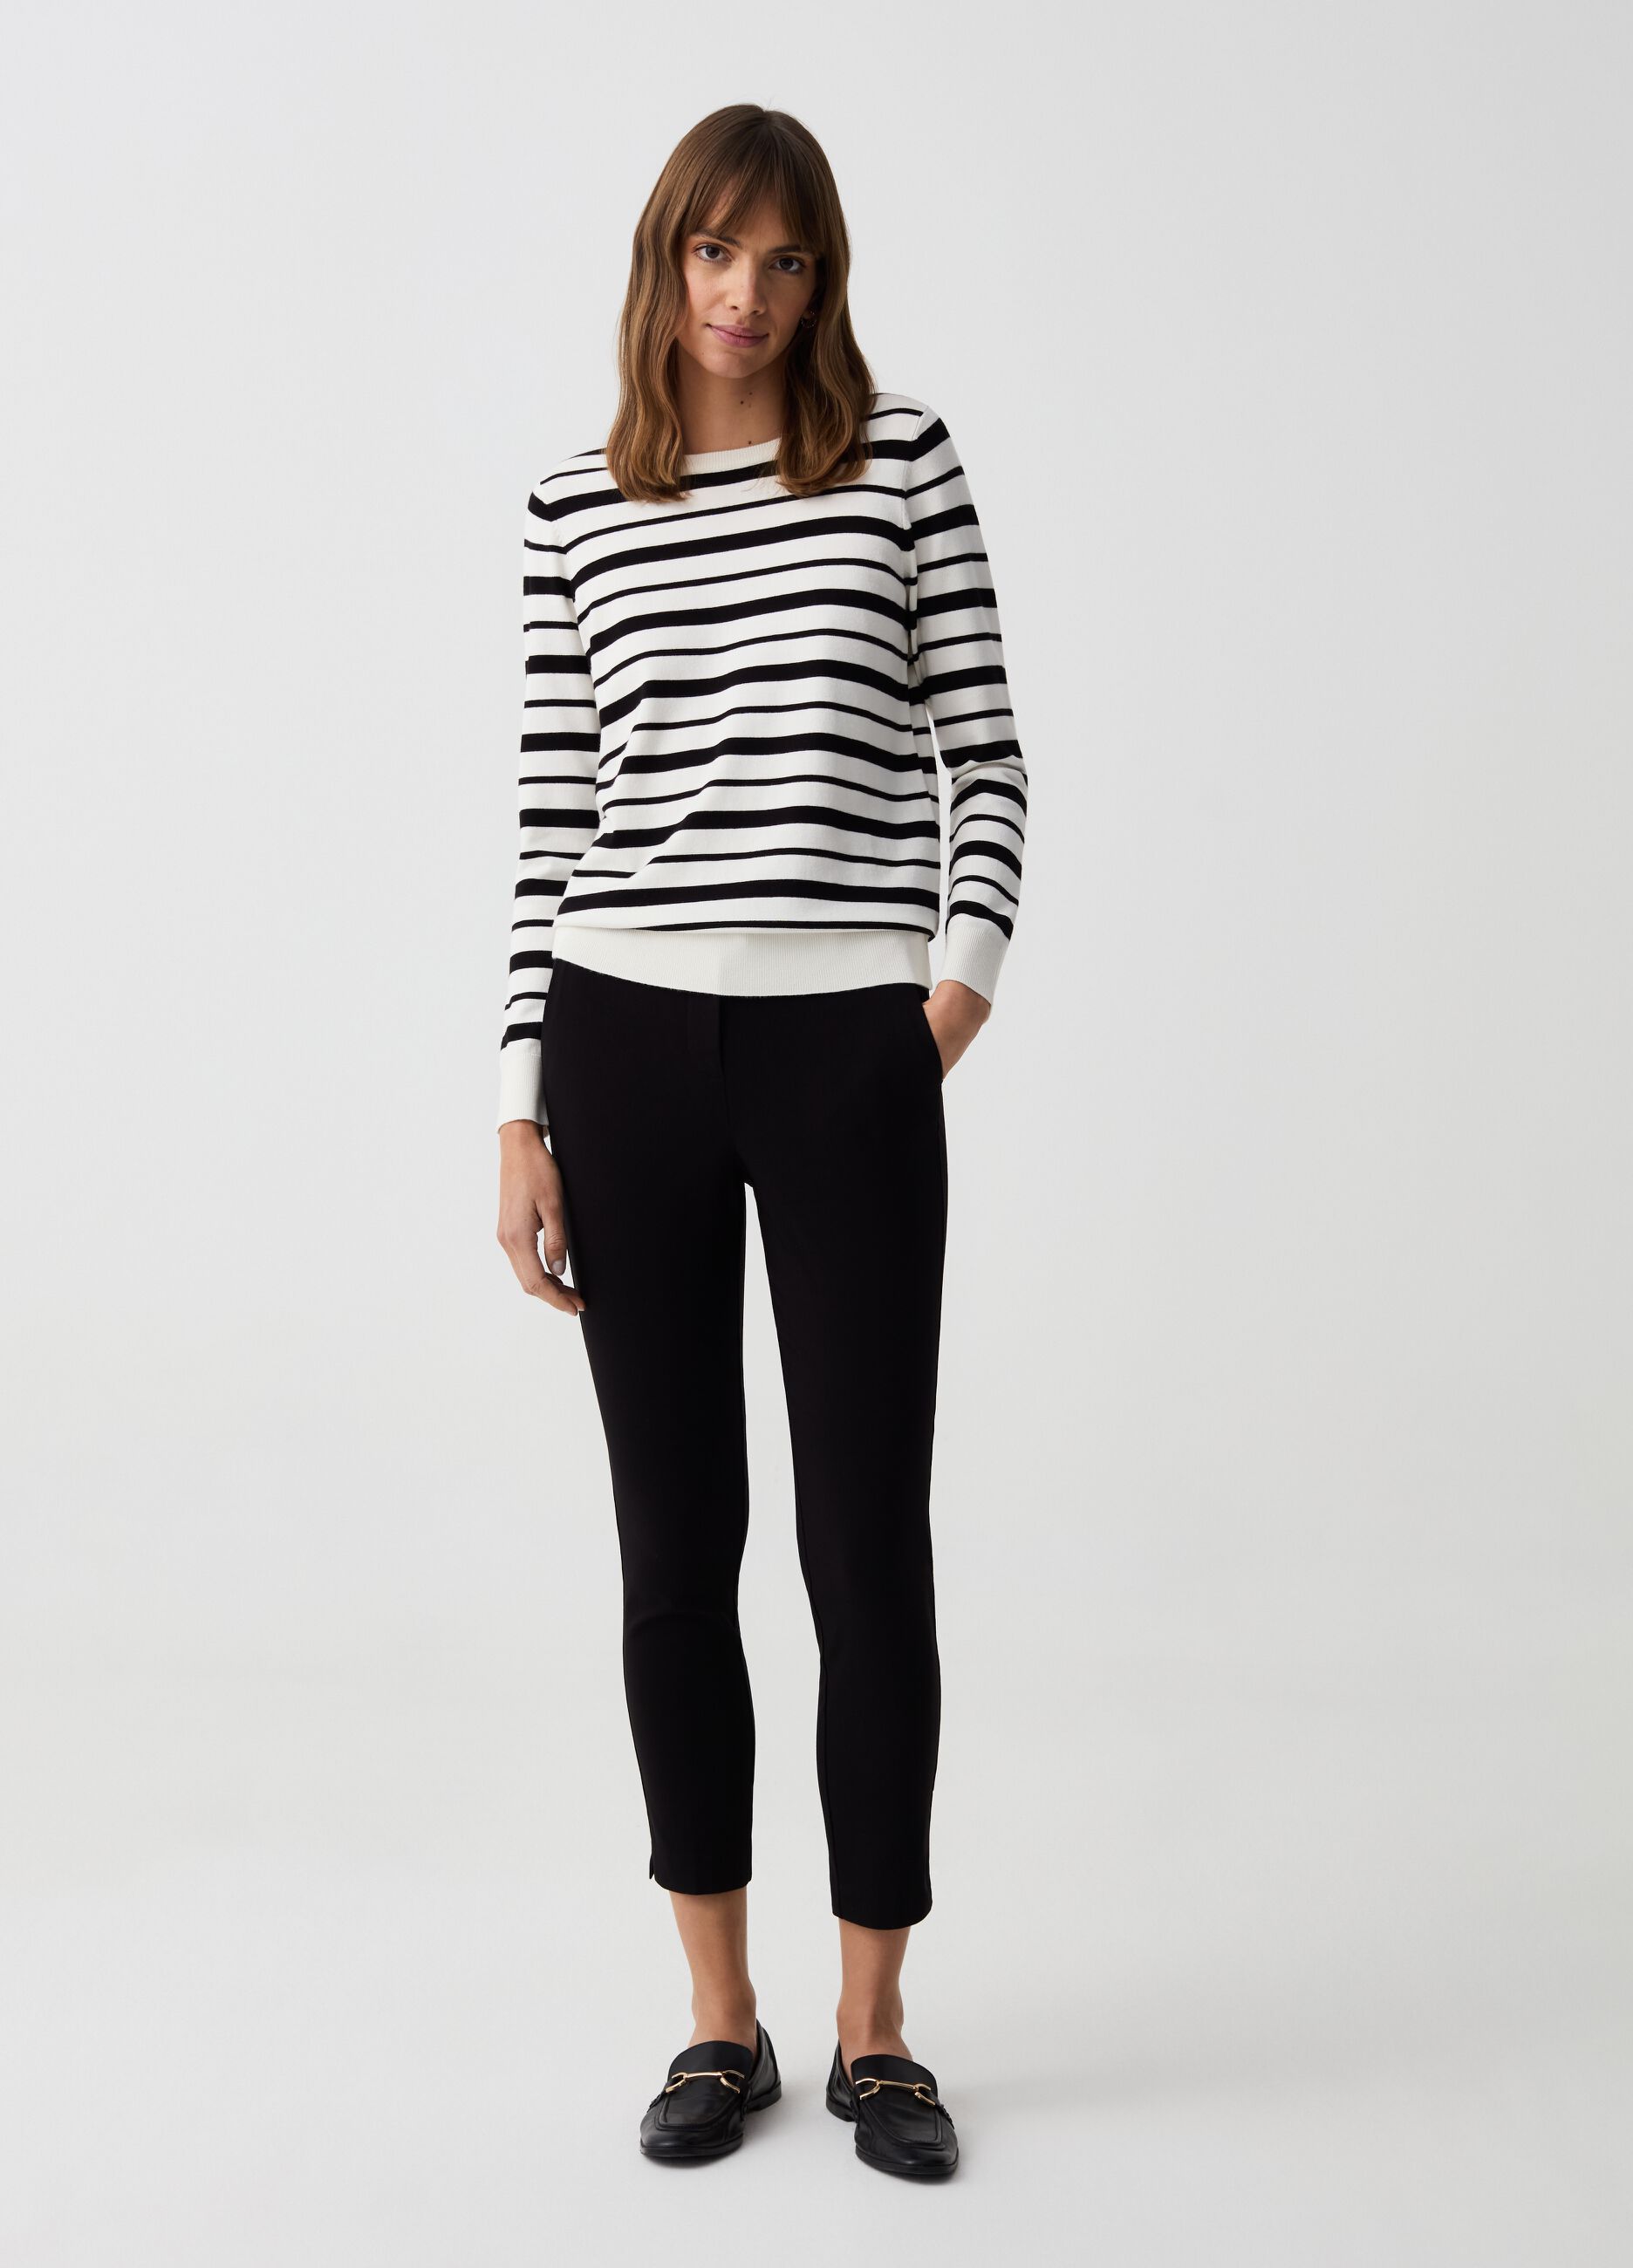 Striped top with long sleeves